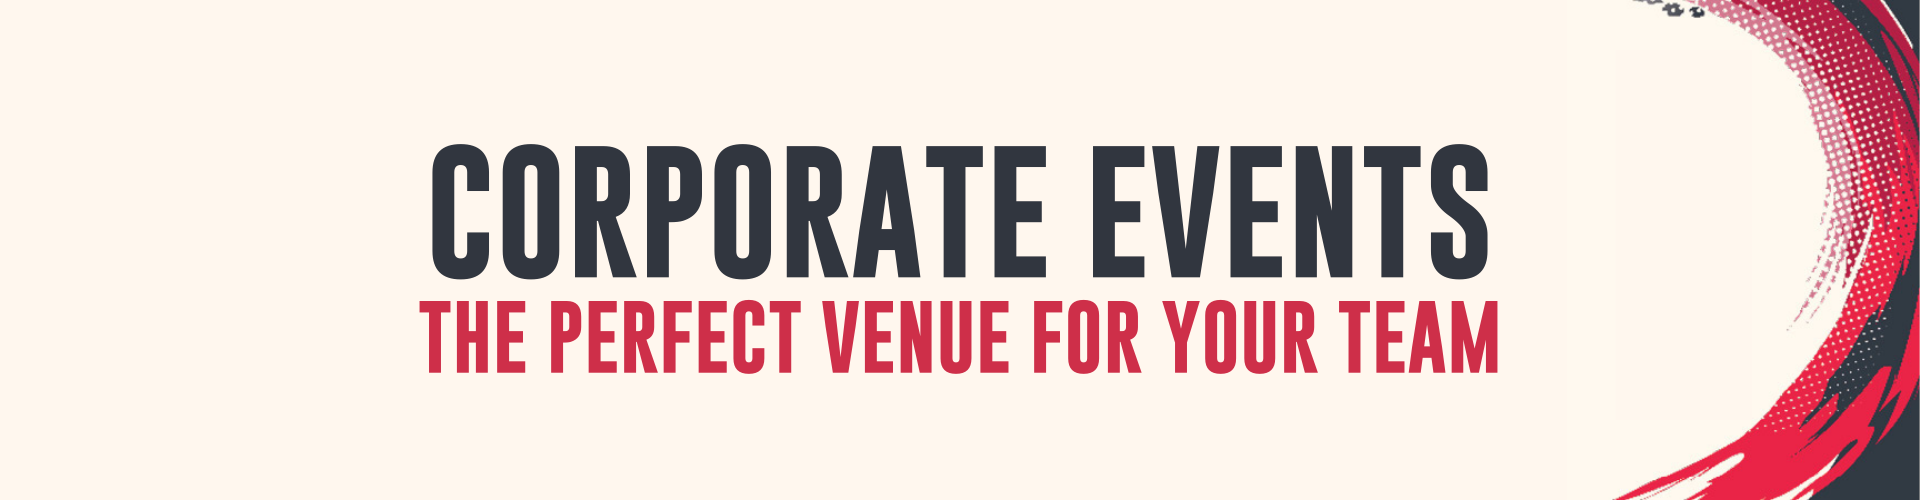 Corporate events - the perfect venue for your team